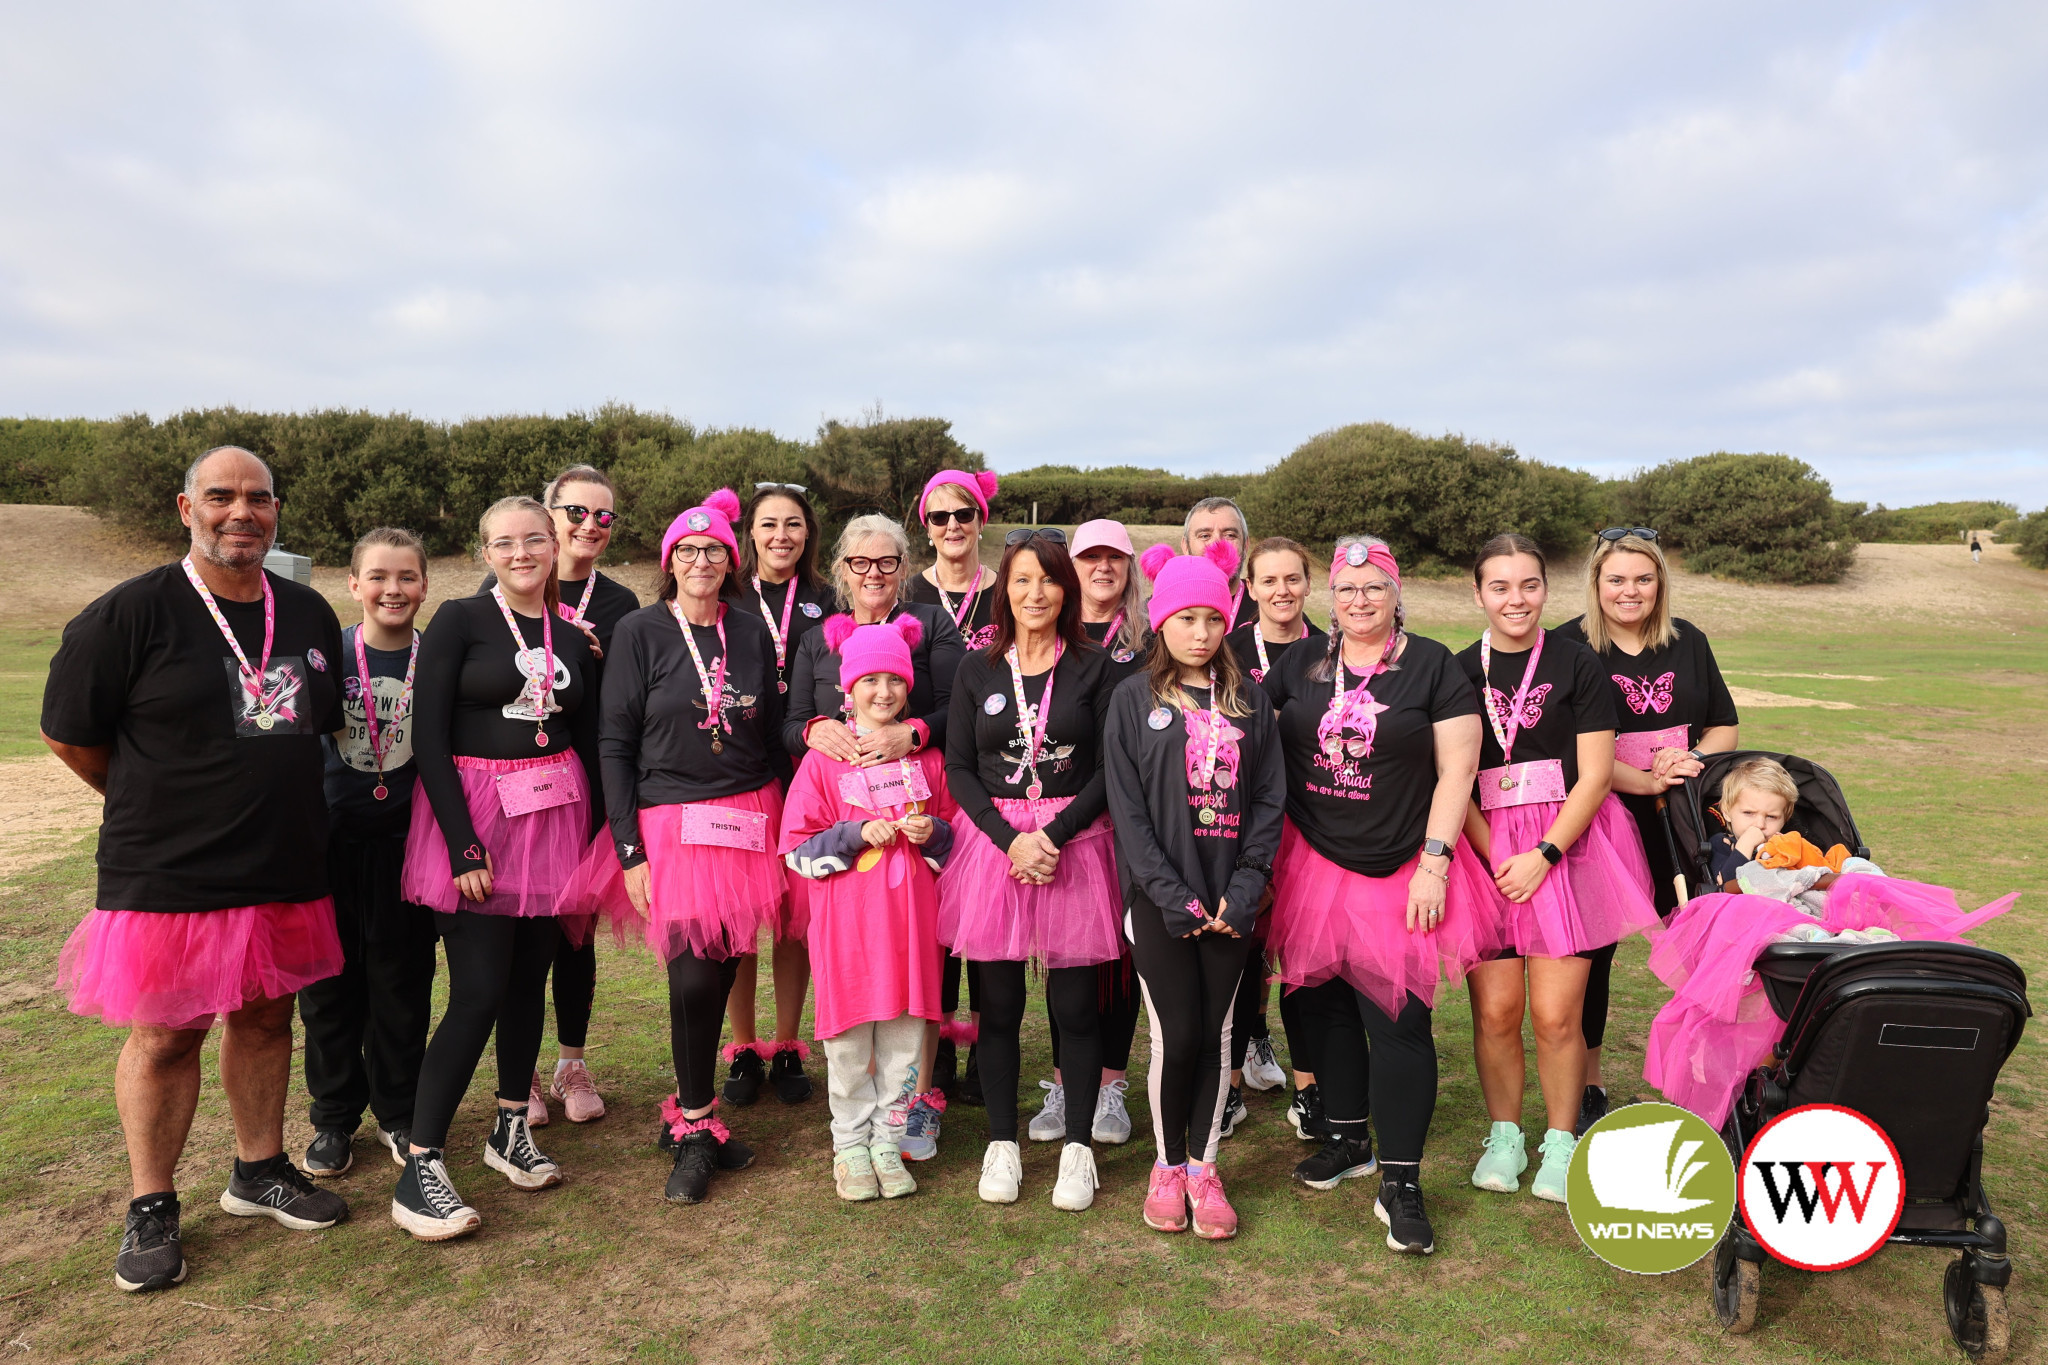 Members of the ‘Bosom Buddies – Walking the Cure’ dressed in costume and enjoyed the morning’s events.